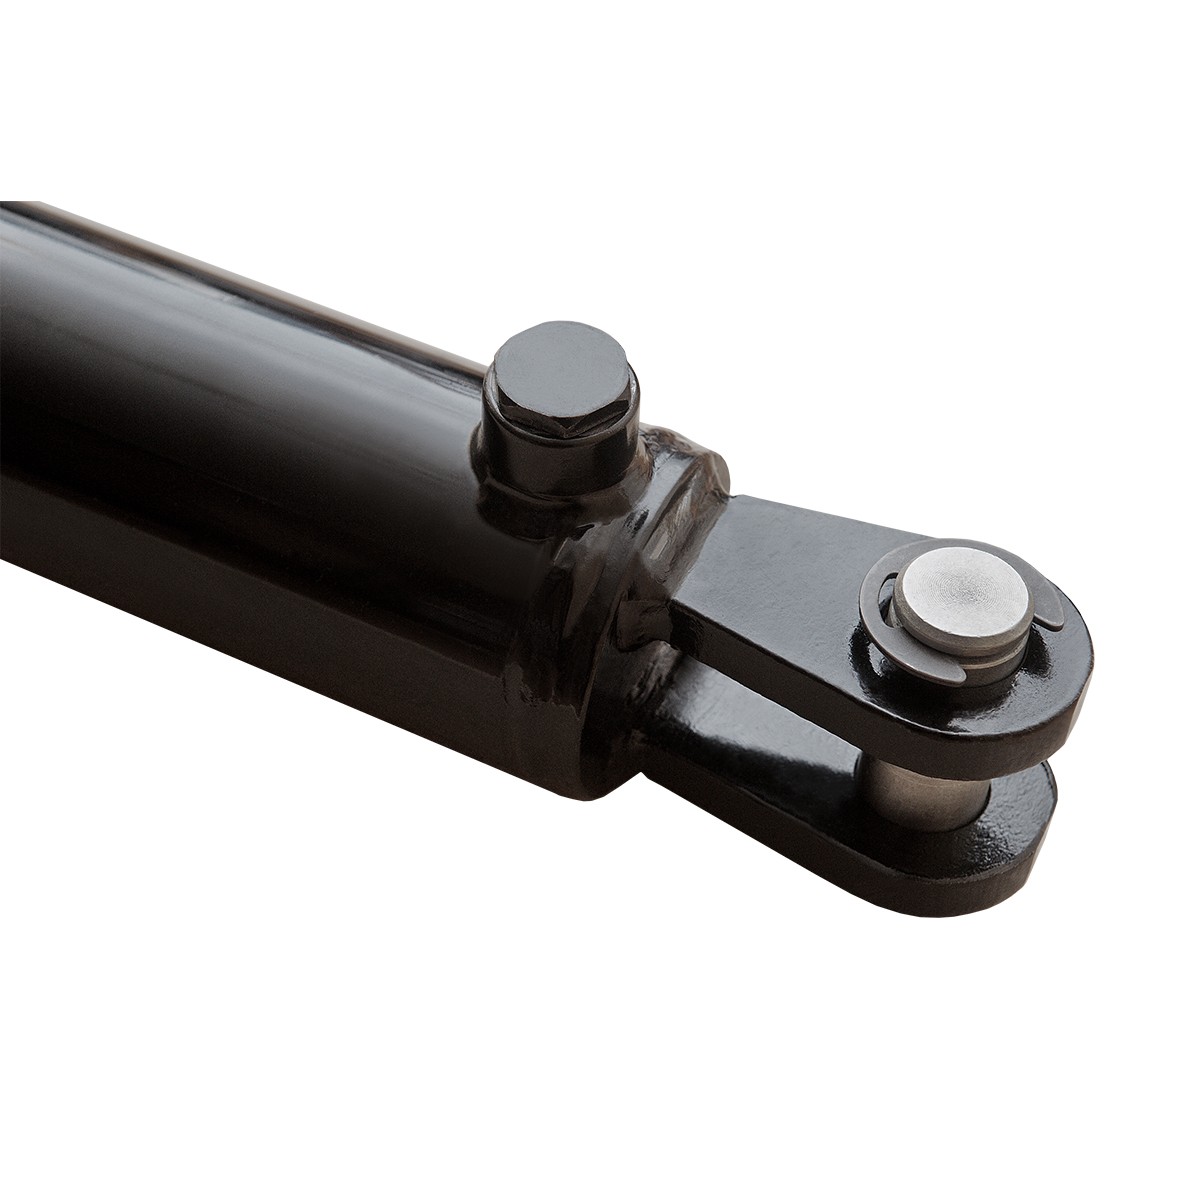 2.5" bore x 8" ASAE stroke ag clevis hydraulic cylinder